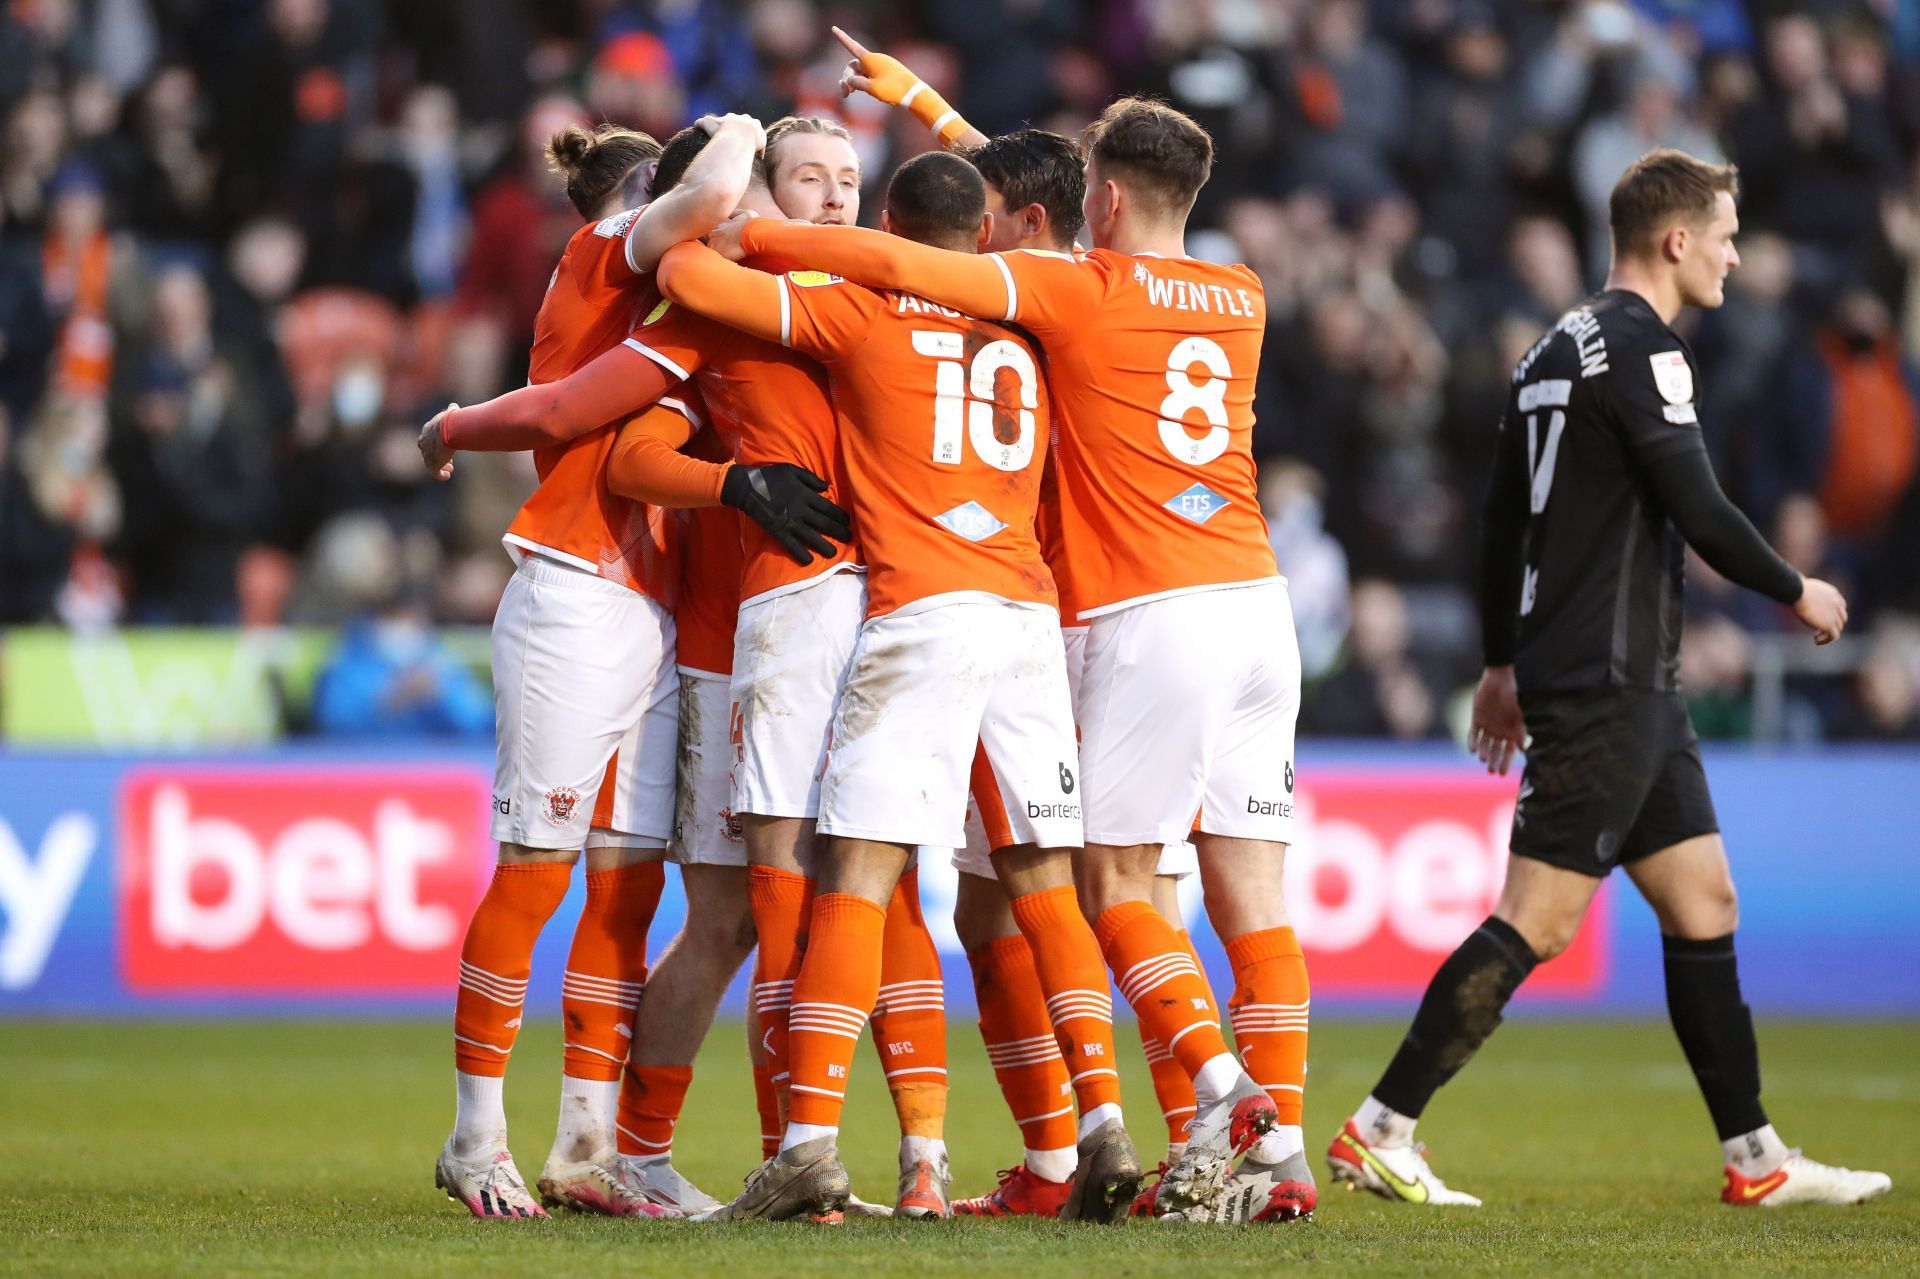 Blackpool are looking to climb up the table